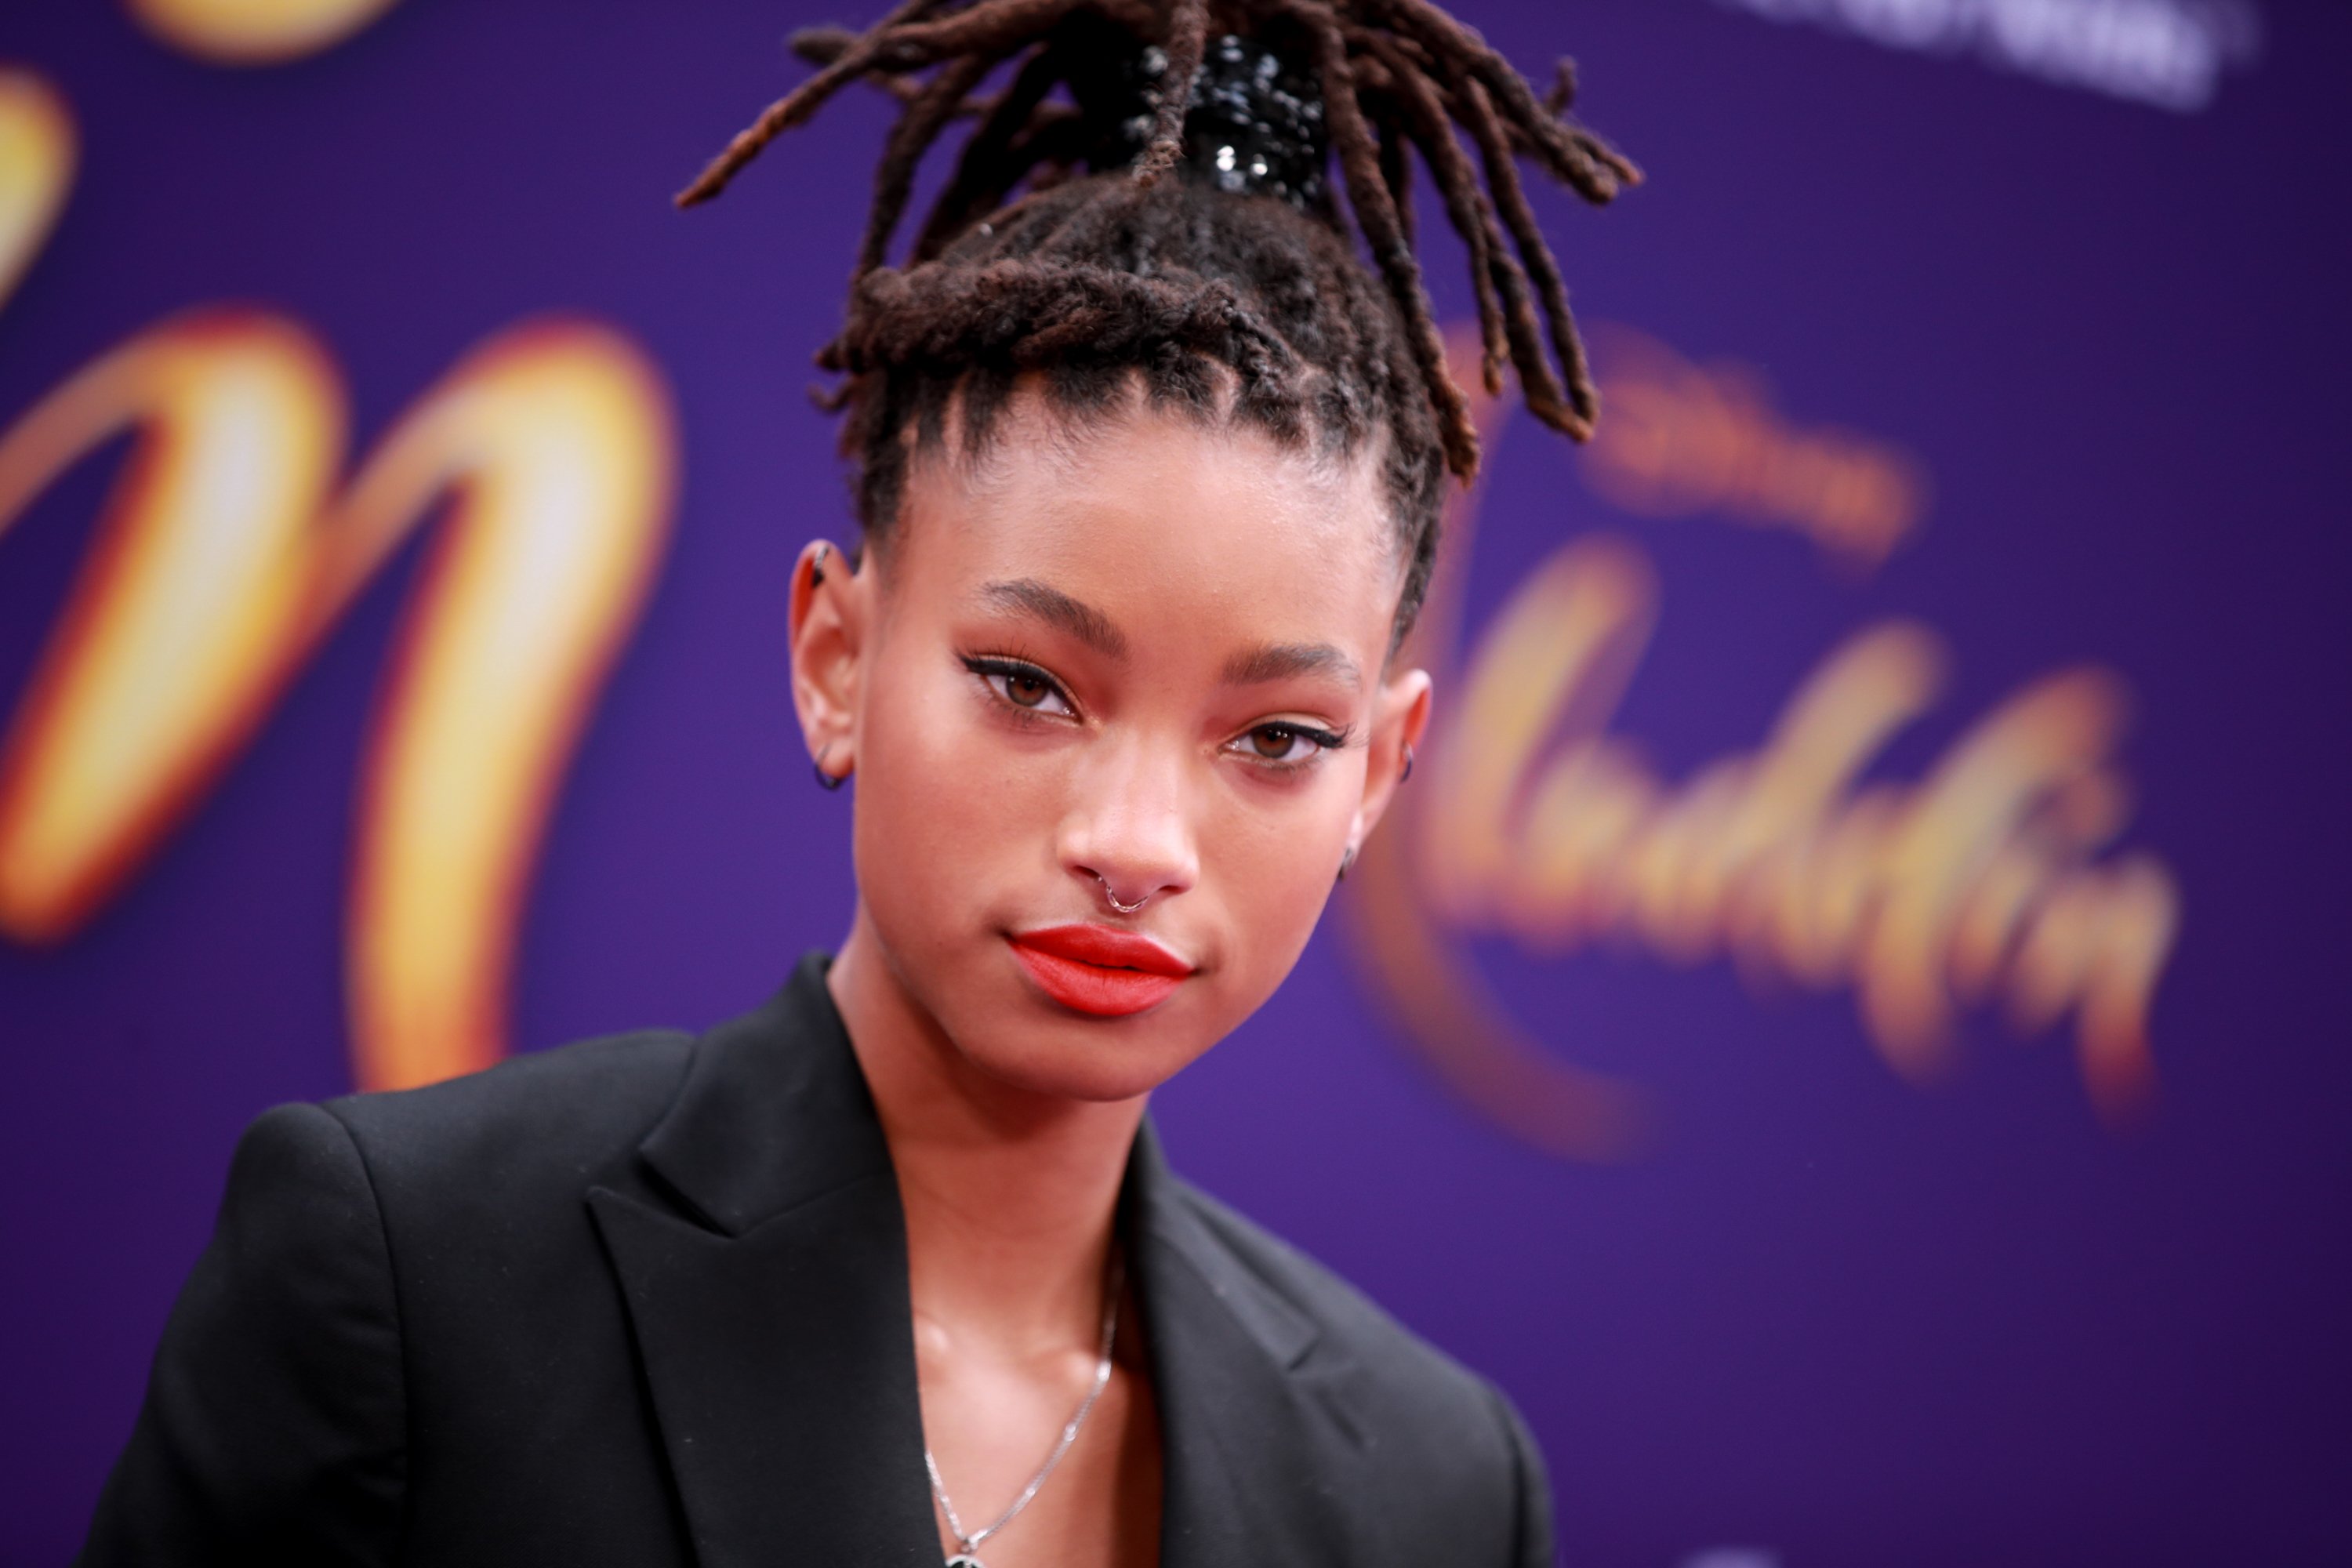 Willow Smith attends the premiere of Disney's "Aladdin" on May 21, 2019 in Los Angeles, California. | Photo: Getty Images